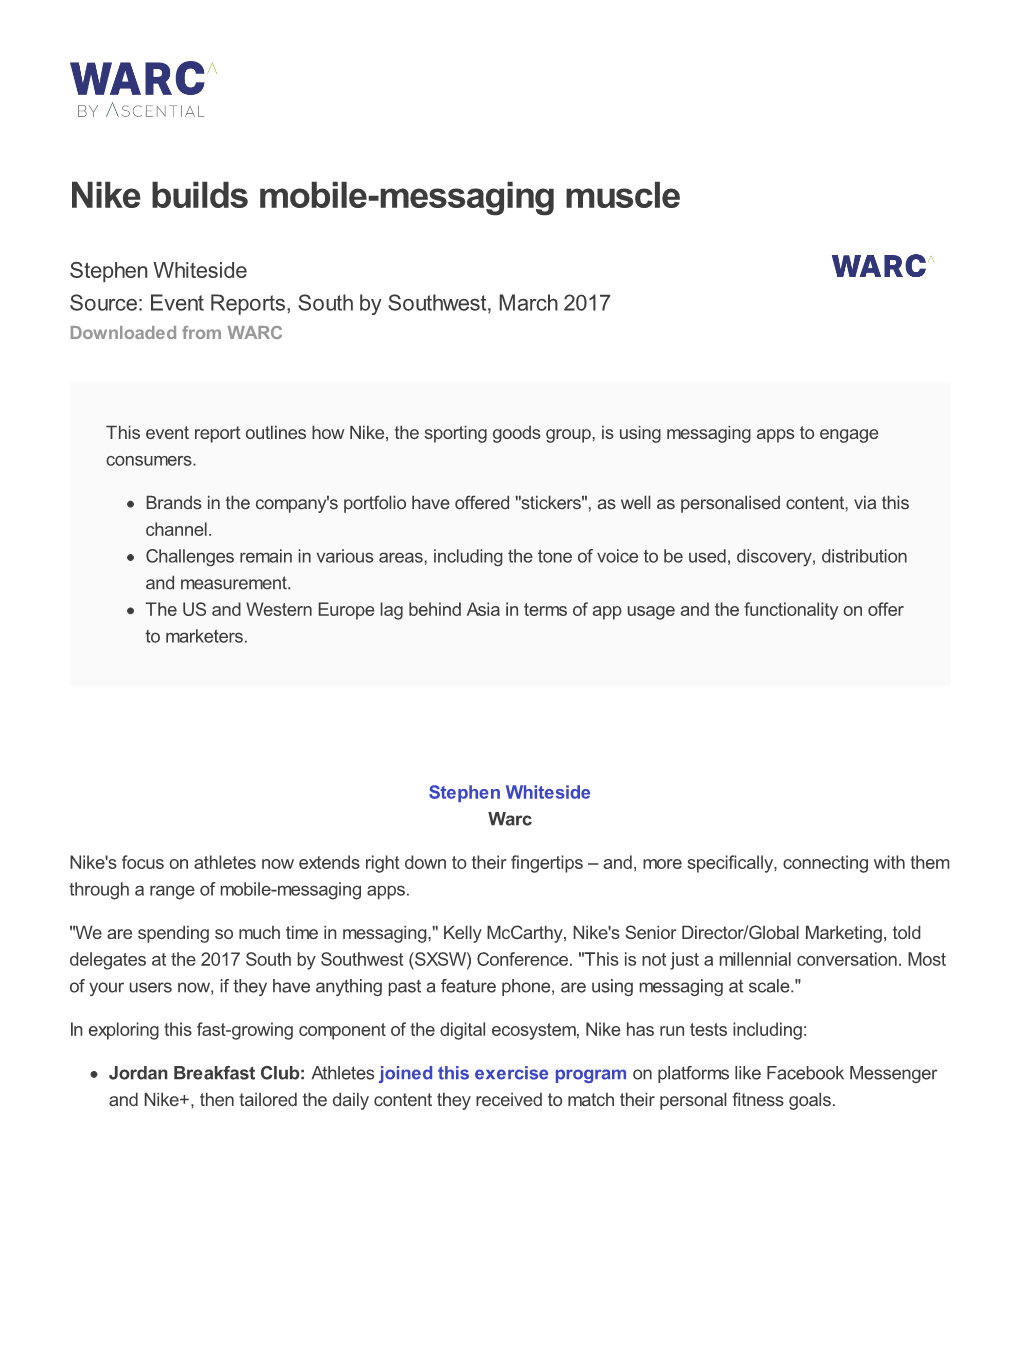 Nike Builds Mobile-Messaging Muscle